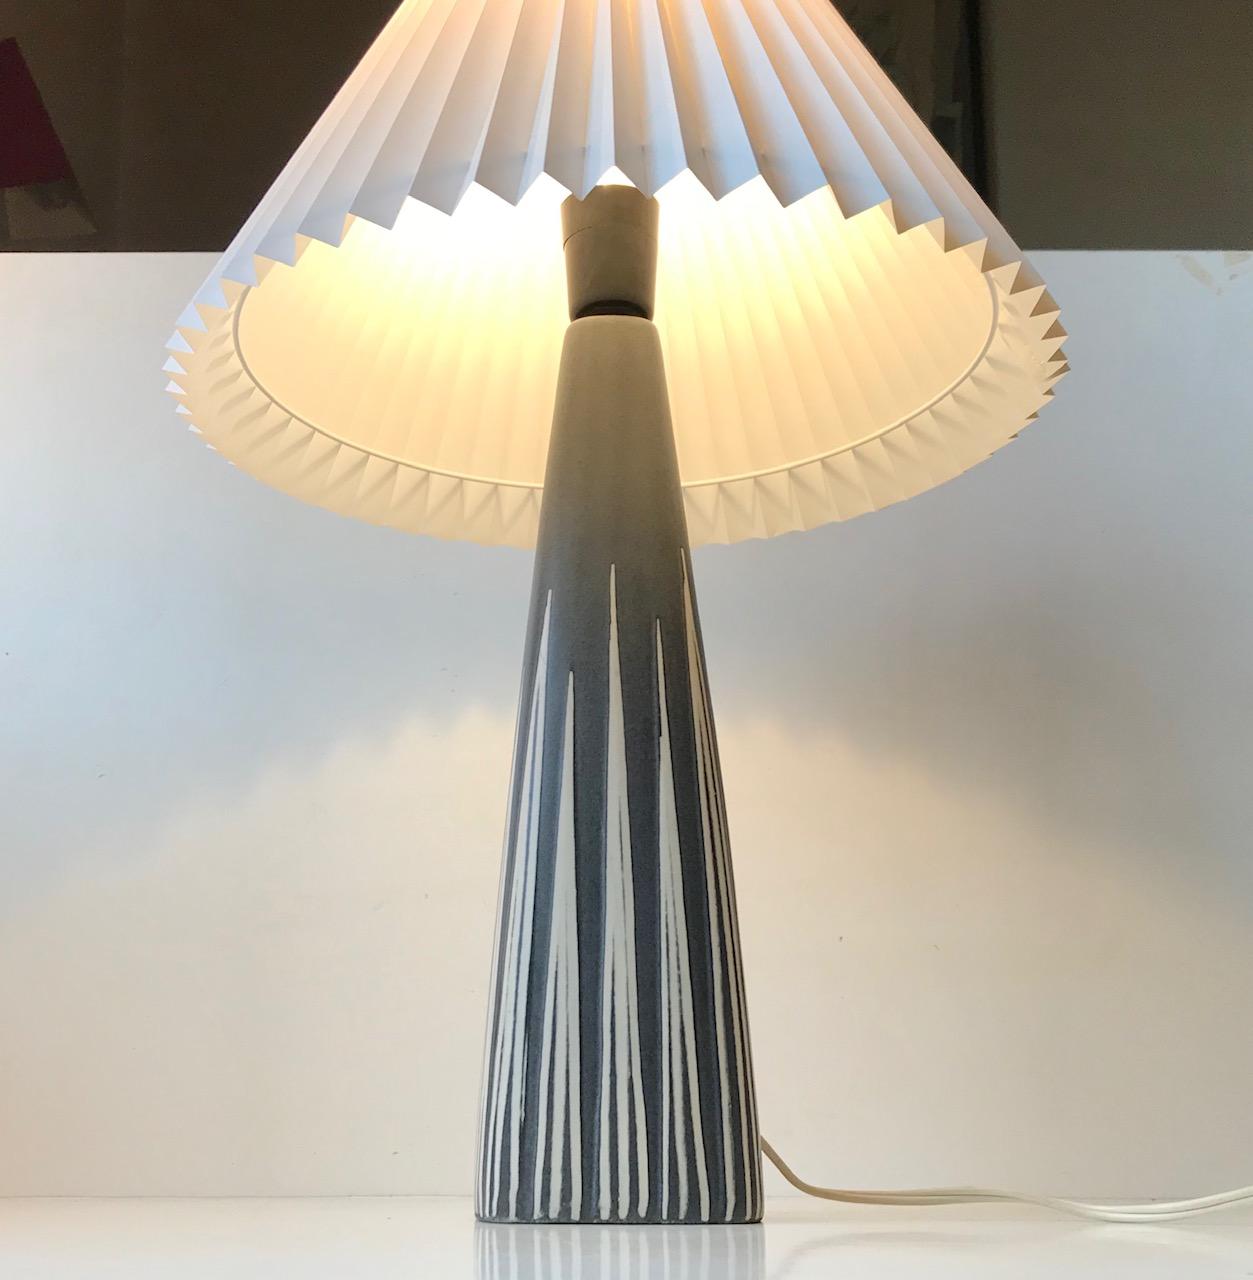 Striped ceramic table lamp designed by Svend Aage Holm-Sørensen. Slate grey main glaze decorated with vertical white stripes. Manufactured by Søholm in Denmark from 1956-1960. Reminiscent in style to Ingrid Atterberg's works for Ekeby. The shade is